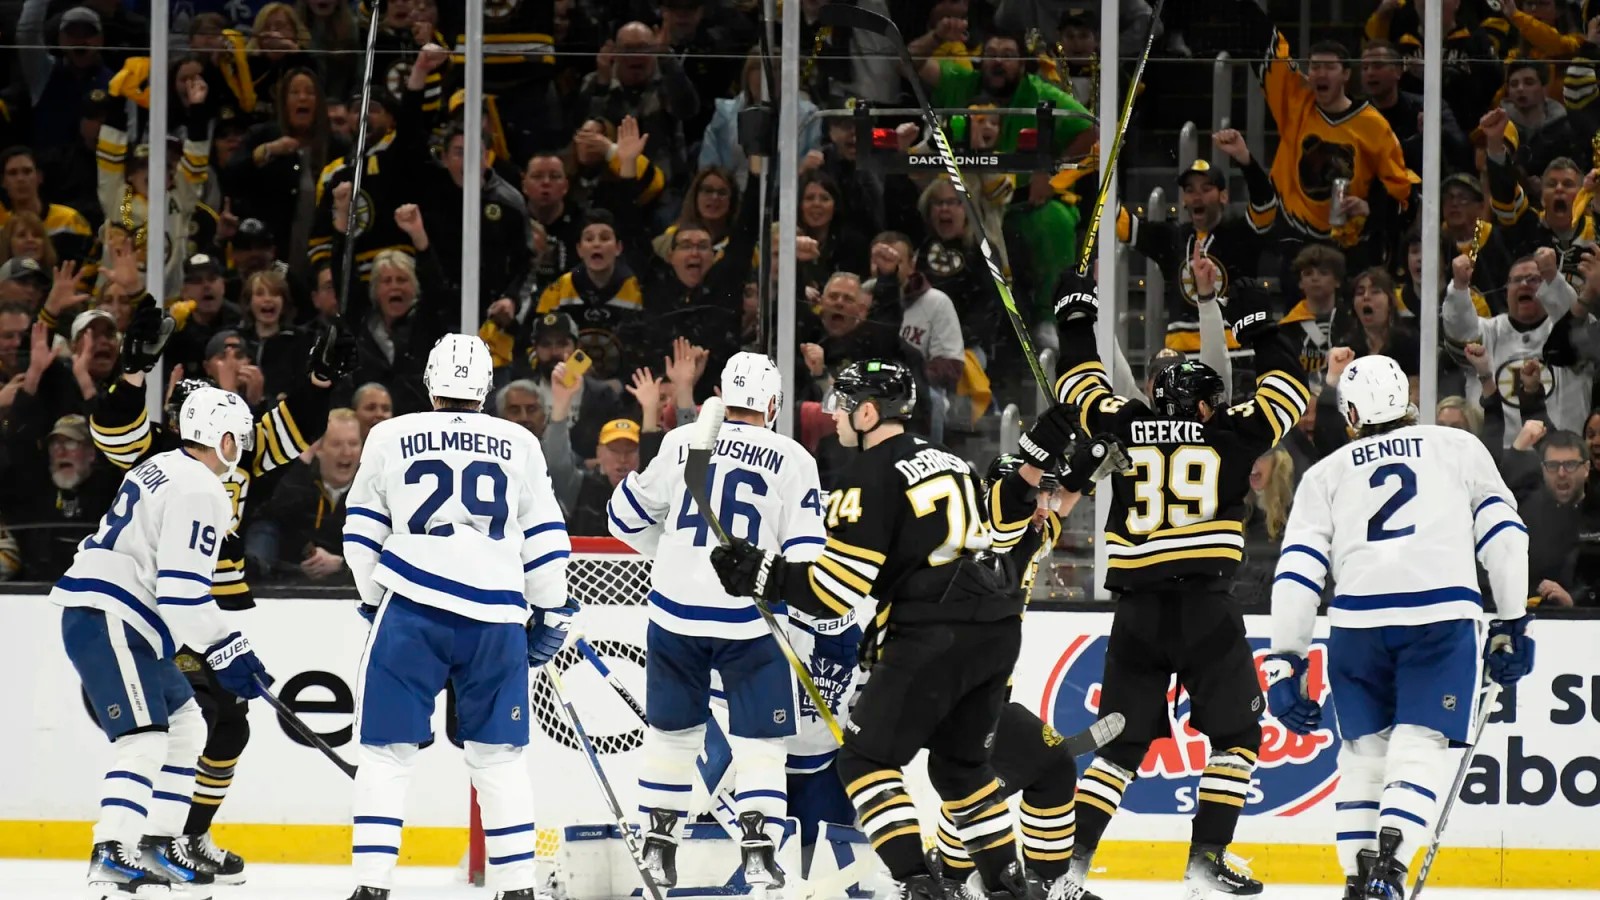 Maple Leafs vs. Bruins, game 1